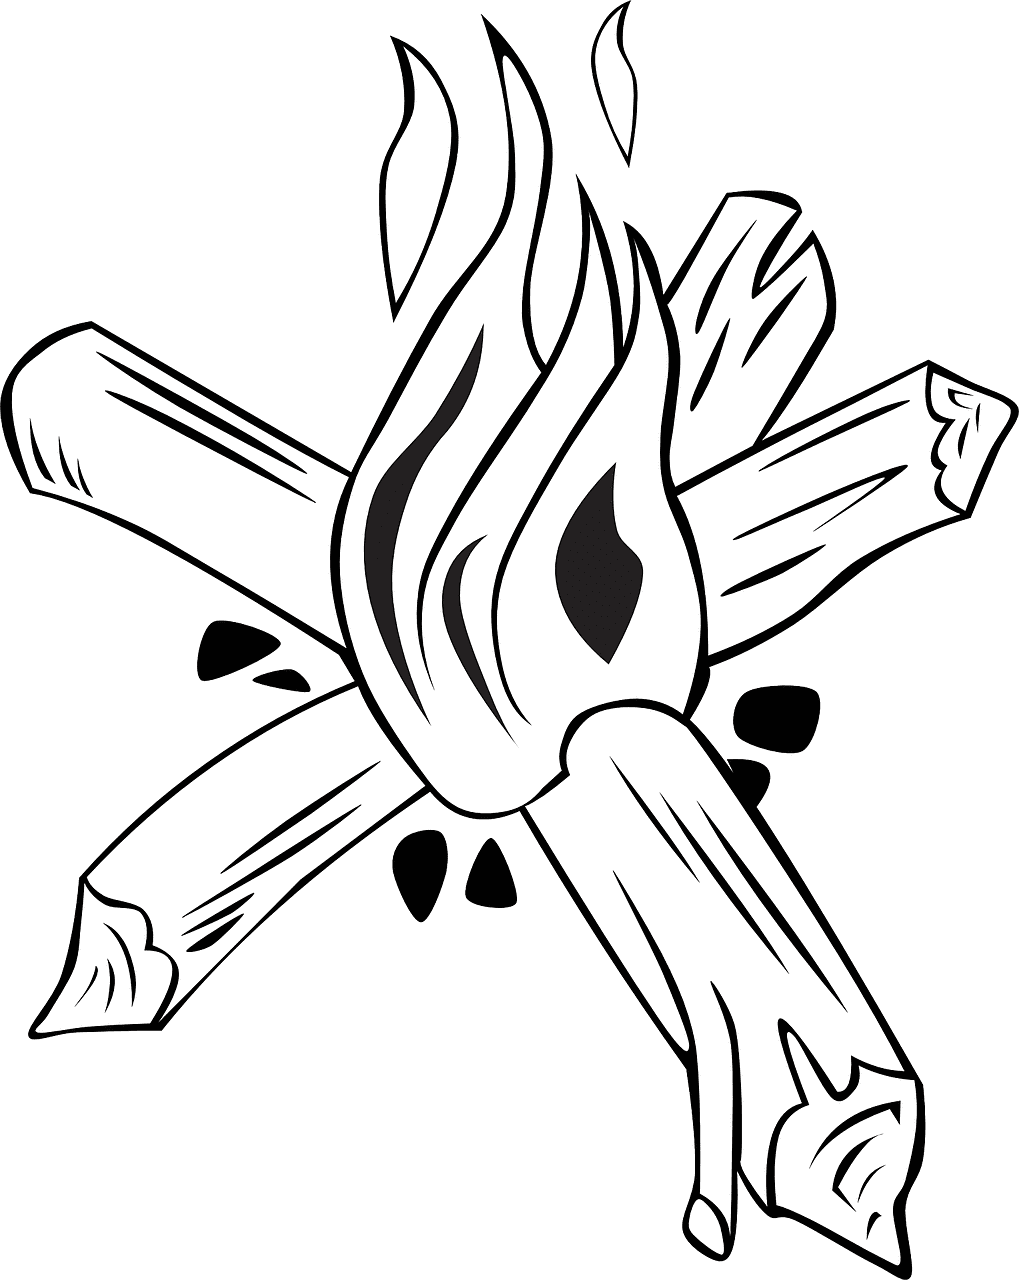 Campfires Fire Flame Coloring Page